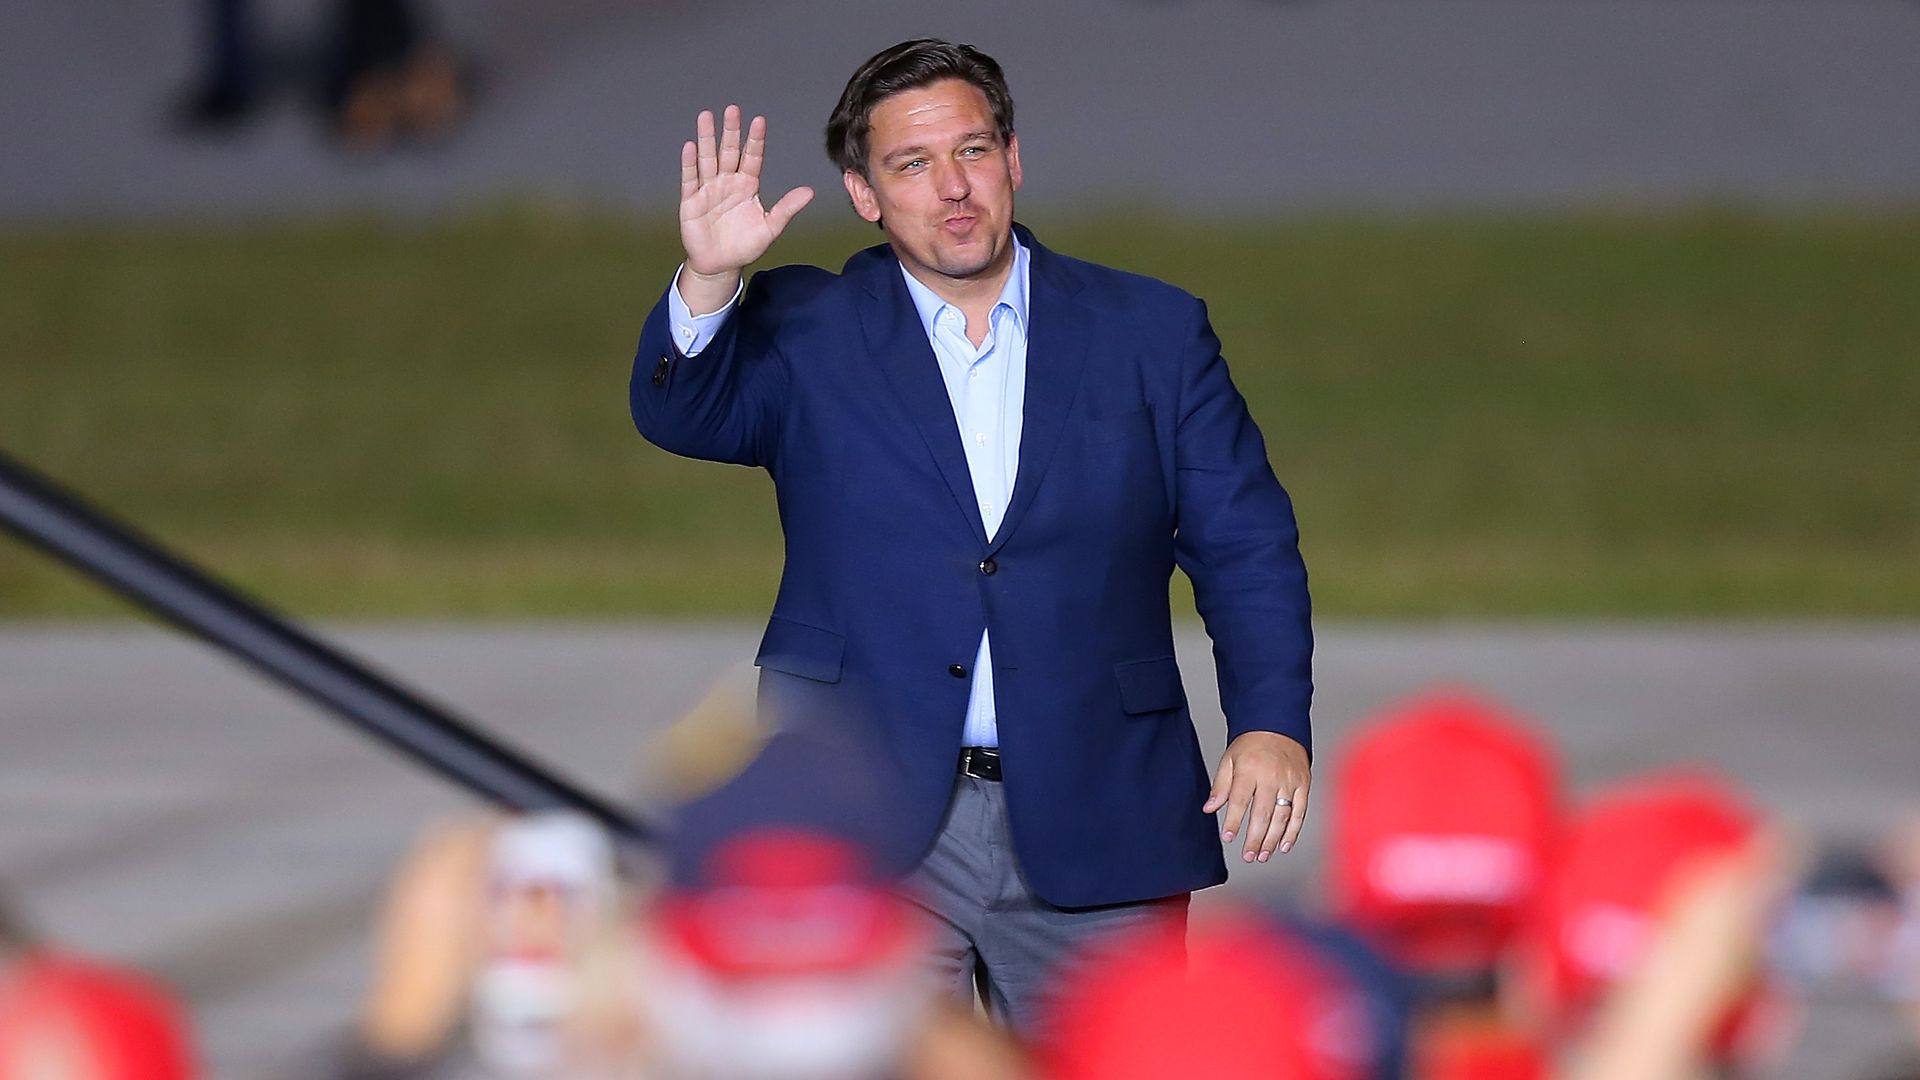 Florida Governor Ron DeSantis waves to supporters during a rally for President Donald Trump